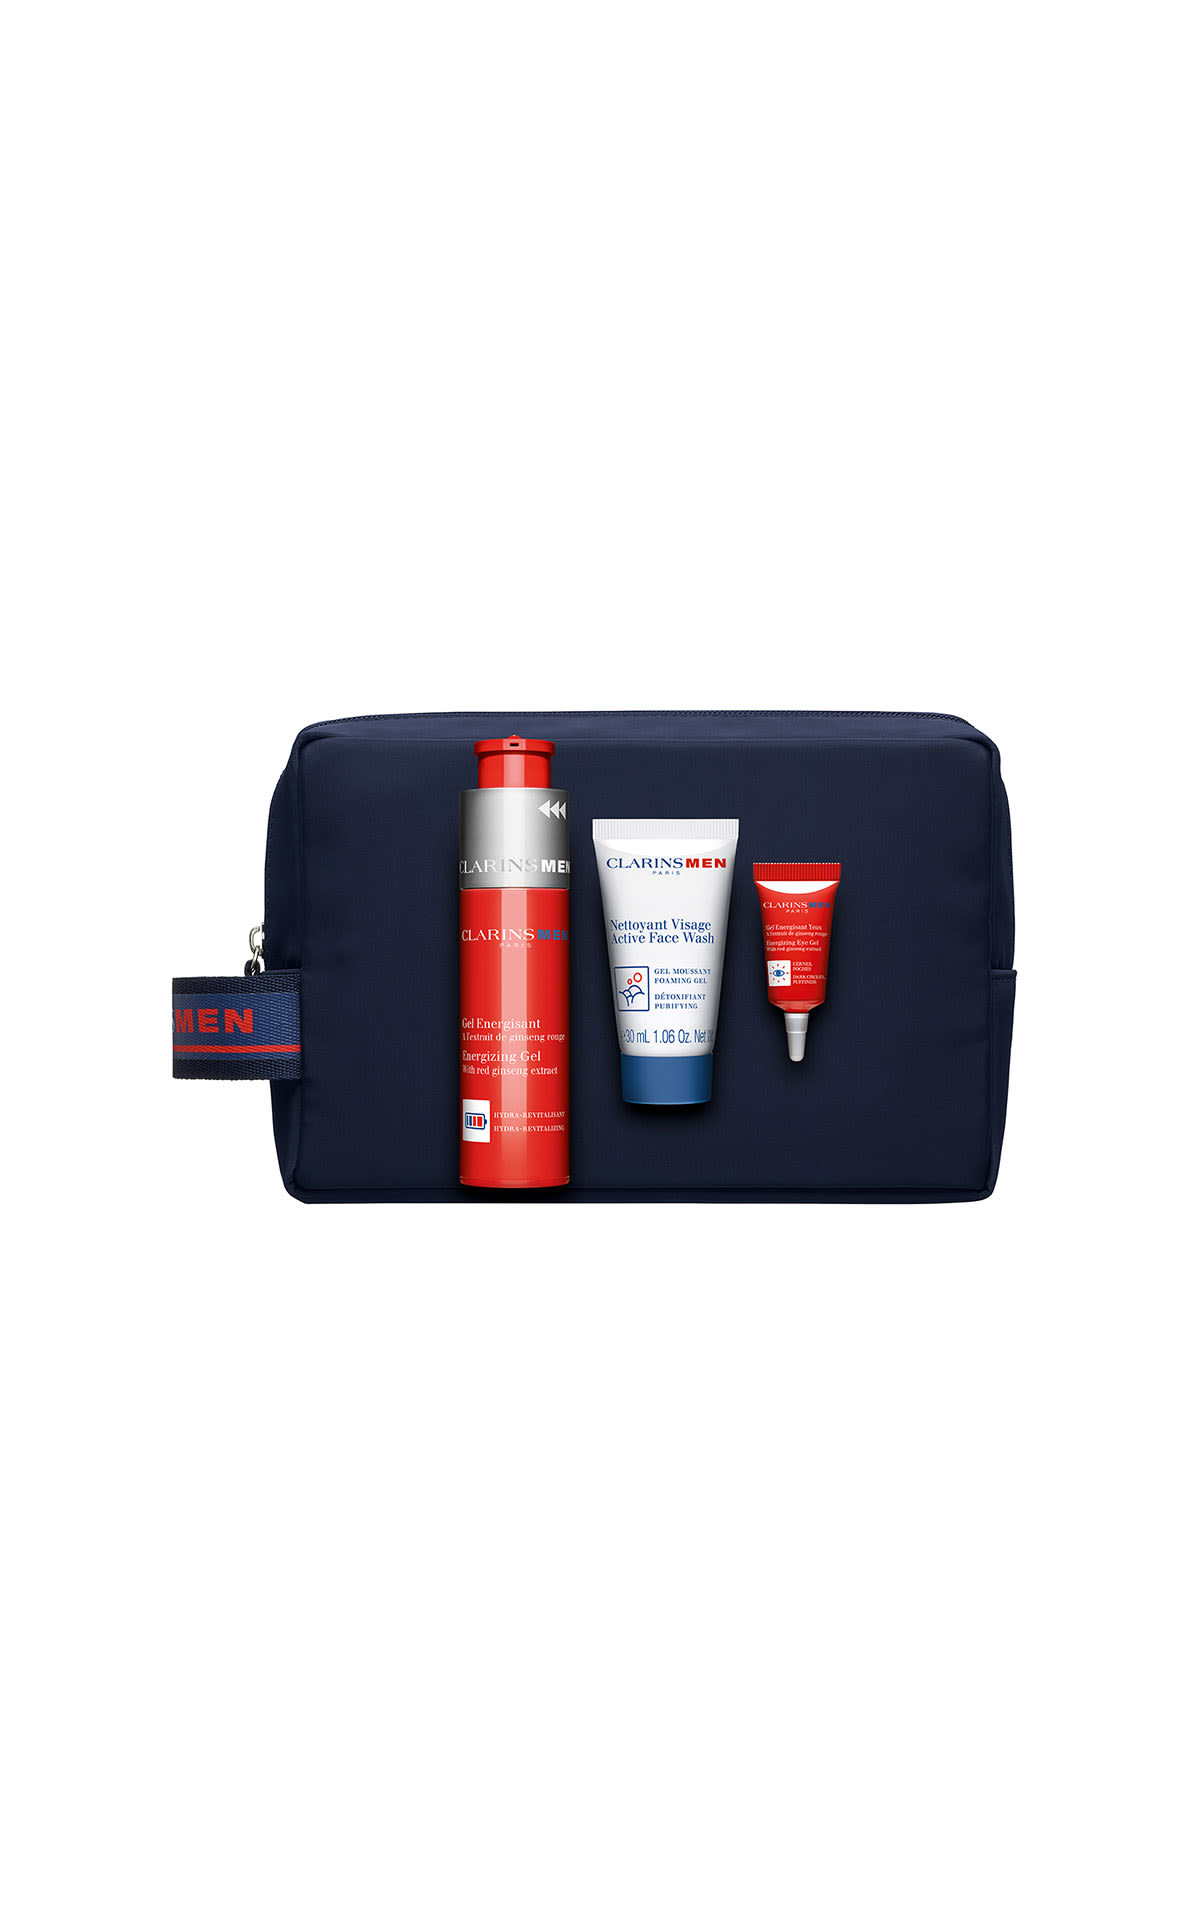 Clarins Men’s energizing collection from Bicester Village